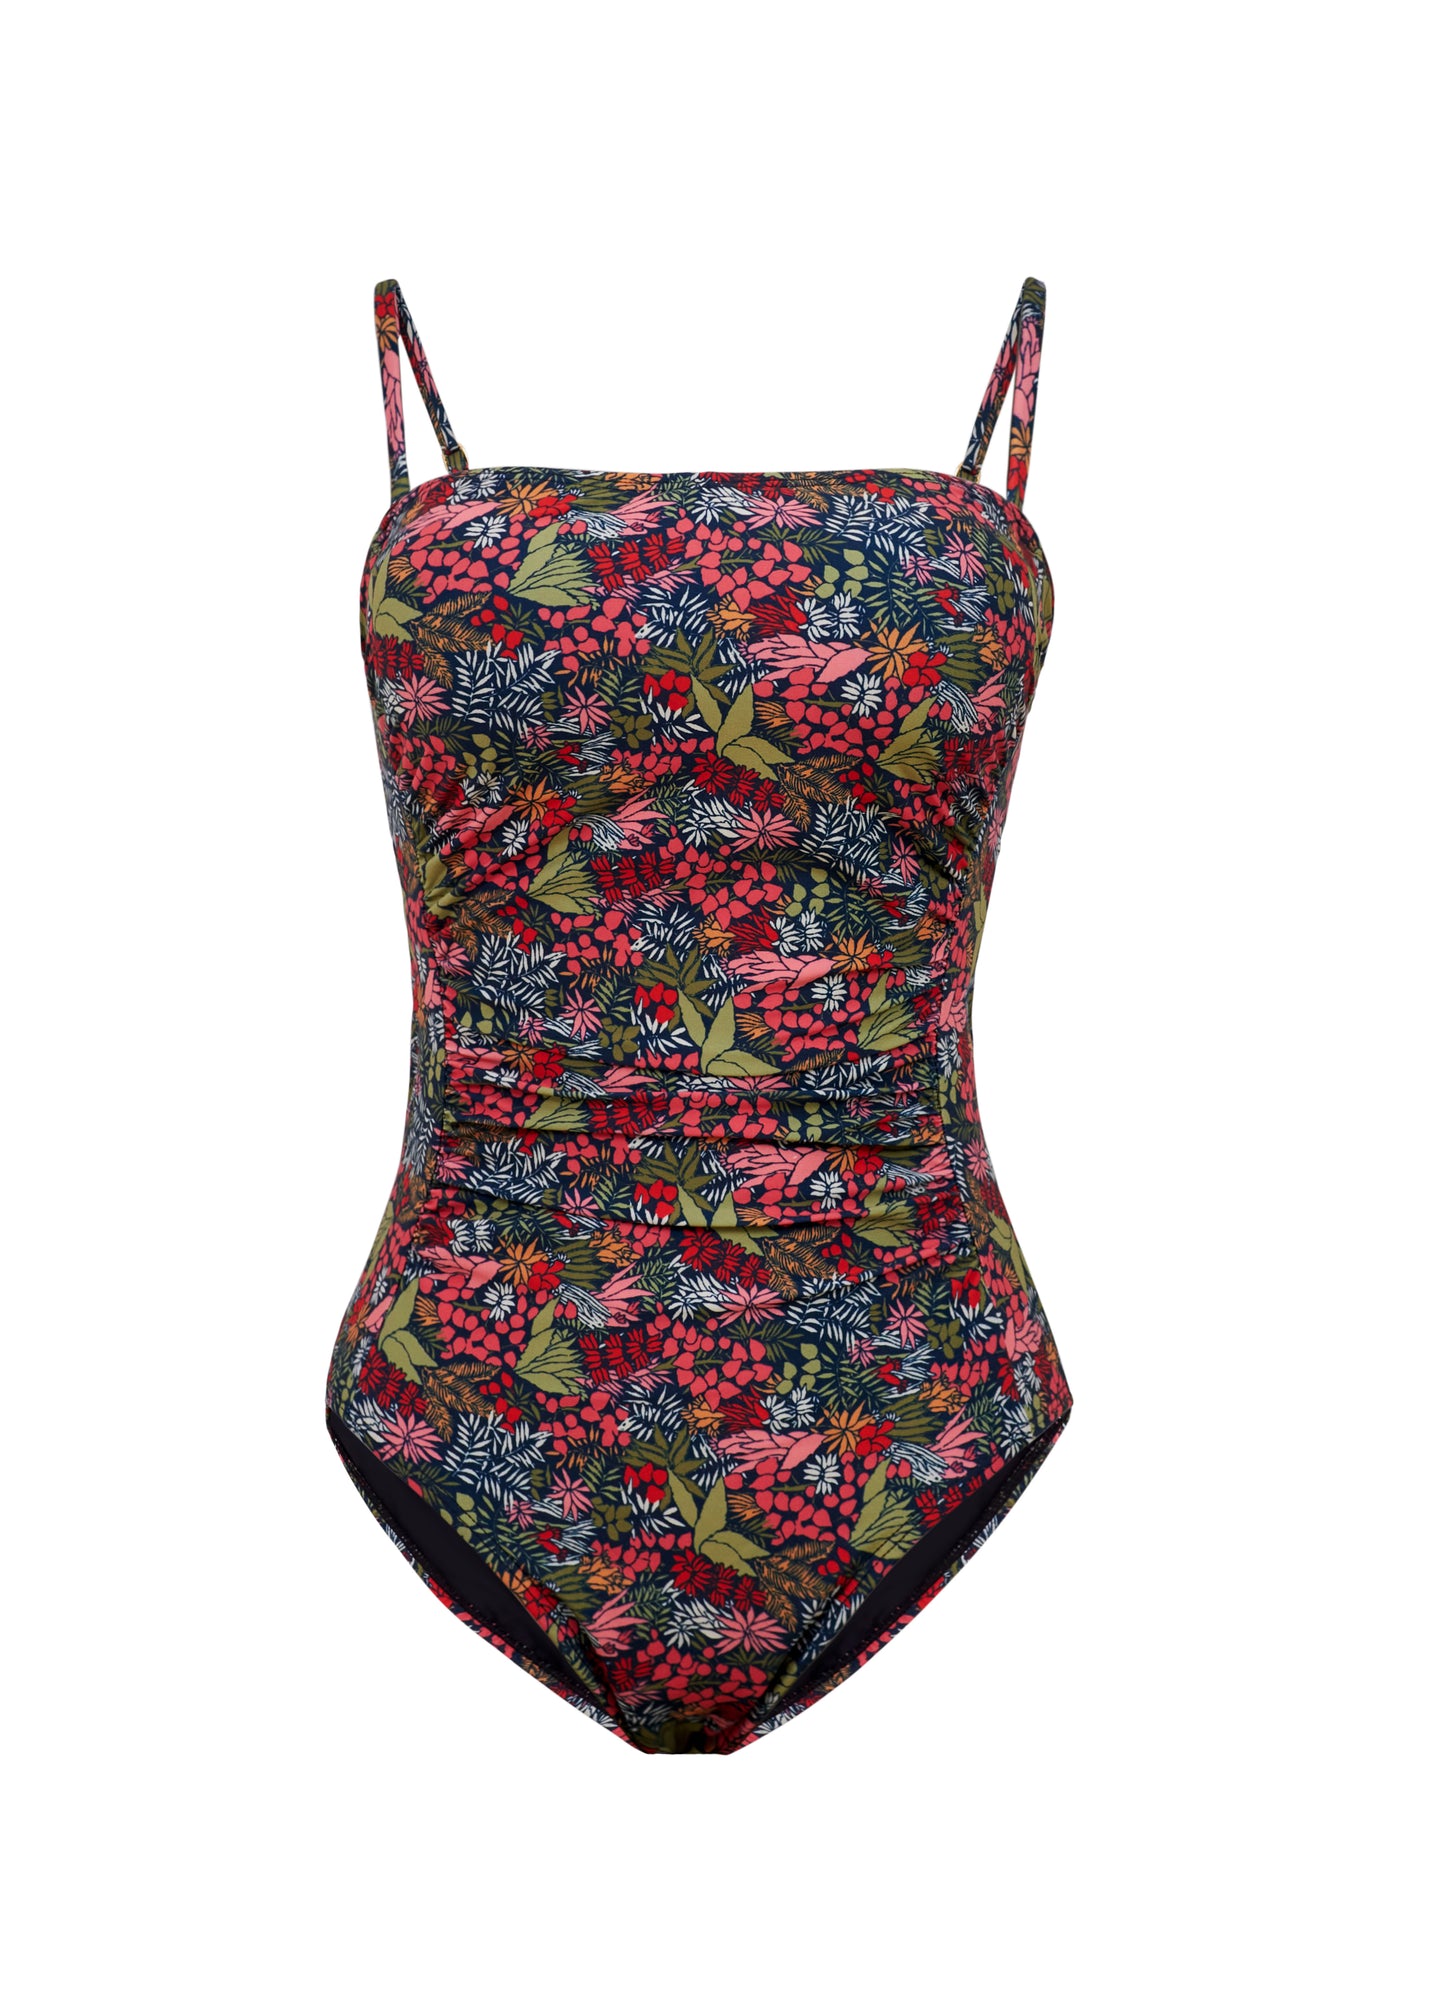 Lupe One-Piece Swimsuit